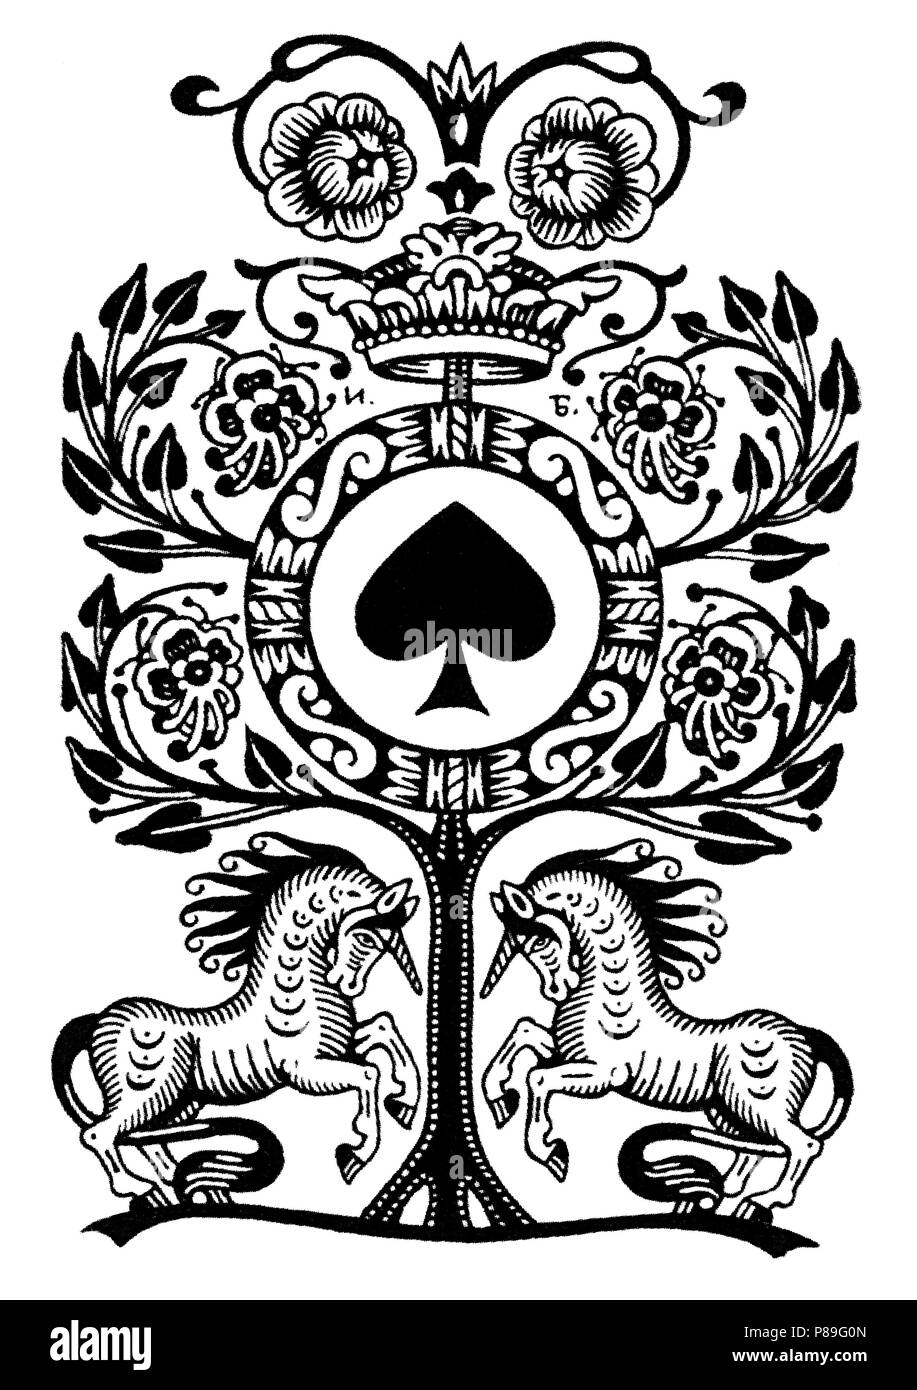 Playing card design. Museum: State Russian Museum, St. Petersburg. Stock Photo